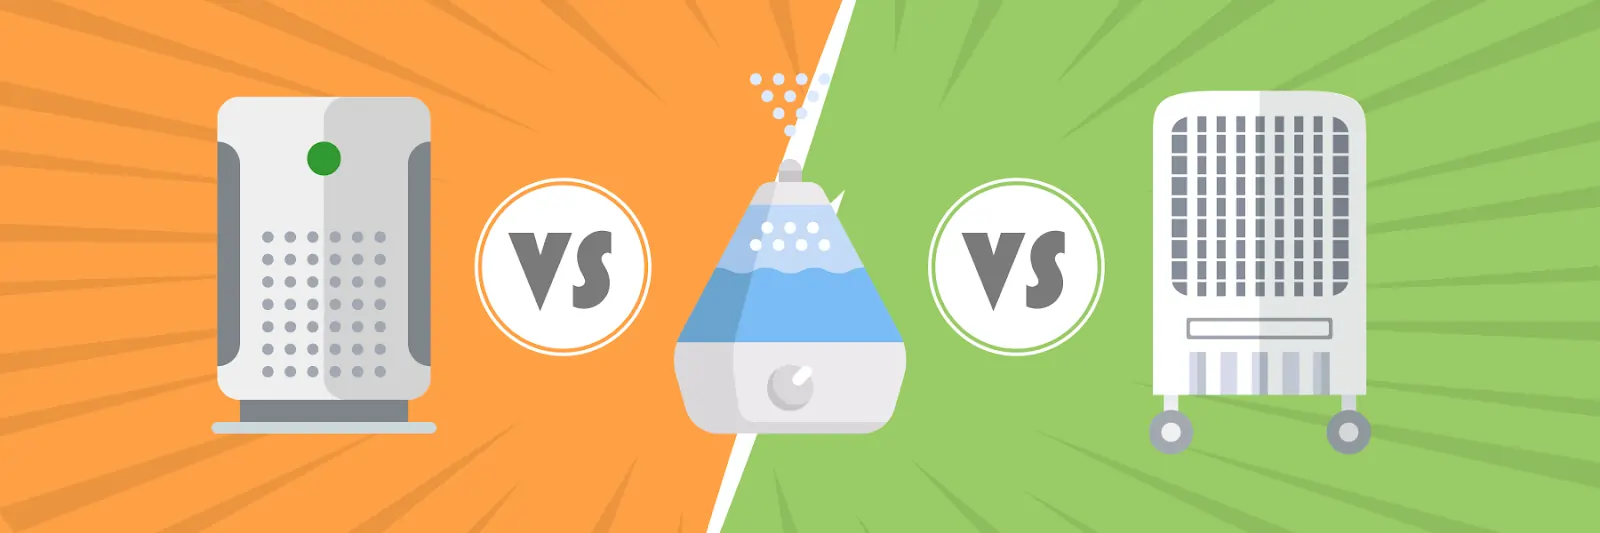 Humidifiers vs Dehumidifiers vs Air Purifiers: What’s the Difference?